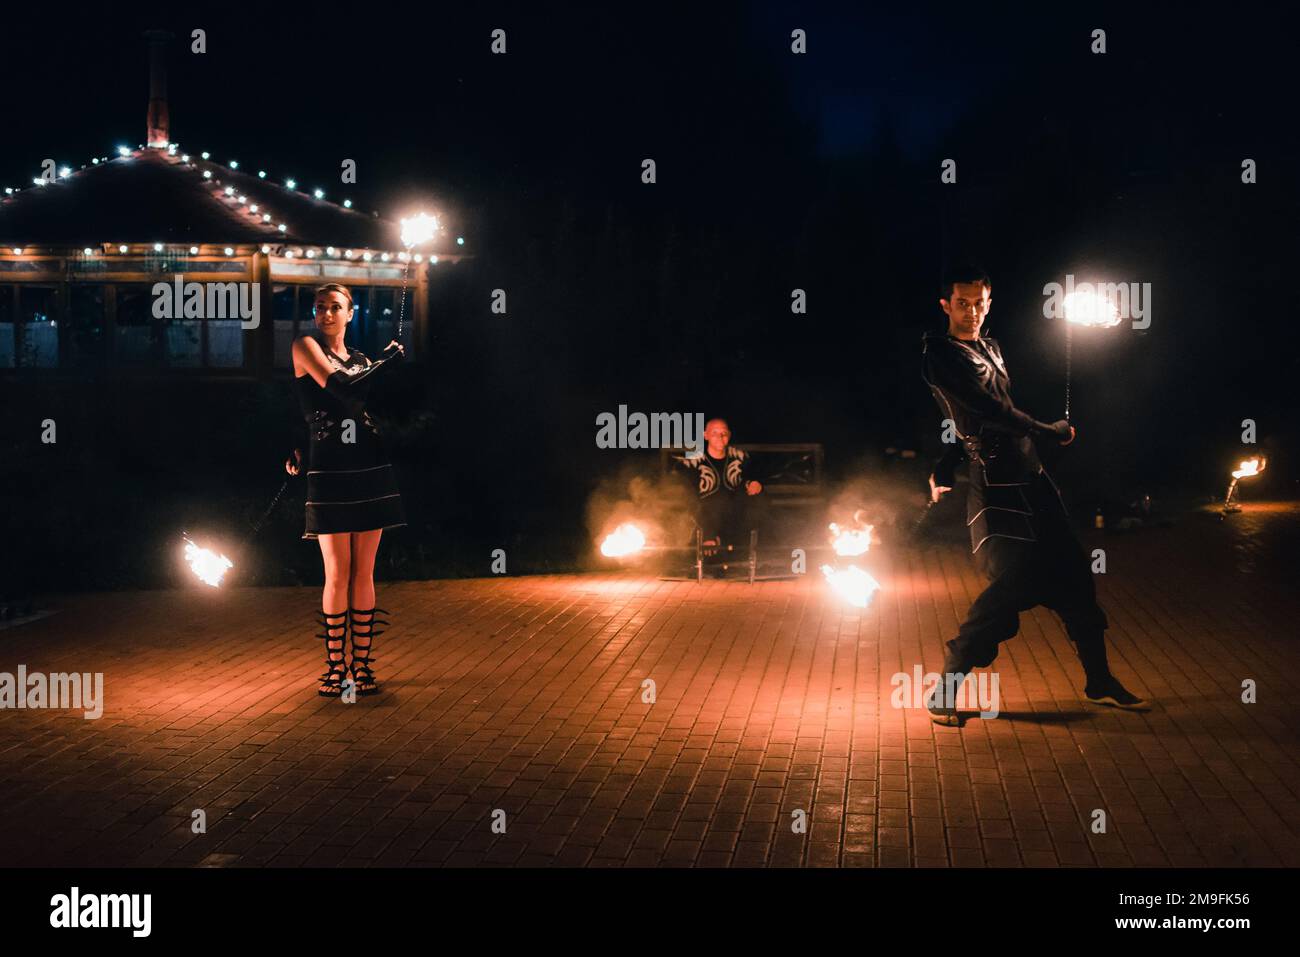 SEMIGORYE, IVANOVO OBLAST, RUSSIA - JULY 16, 2016: Dangerous fire show from the team of professional performers with burning torches and sparks Stock Photo